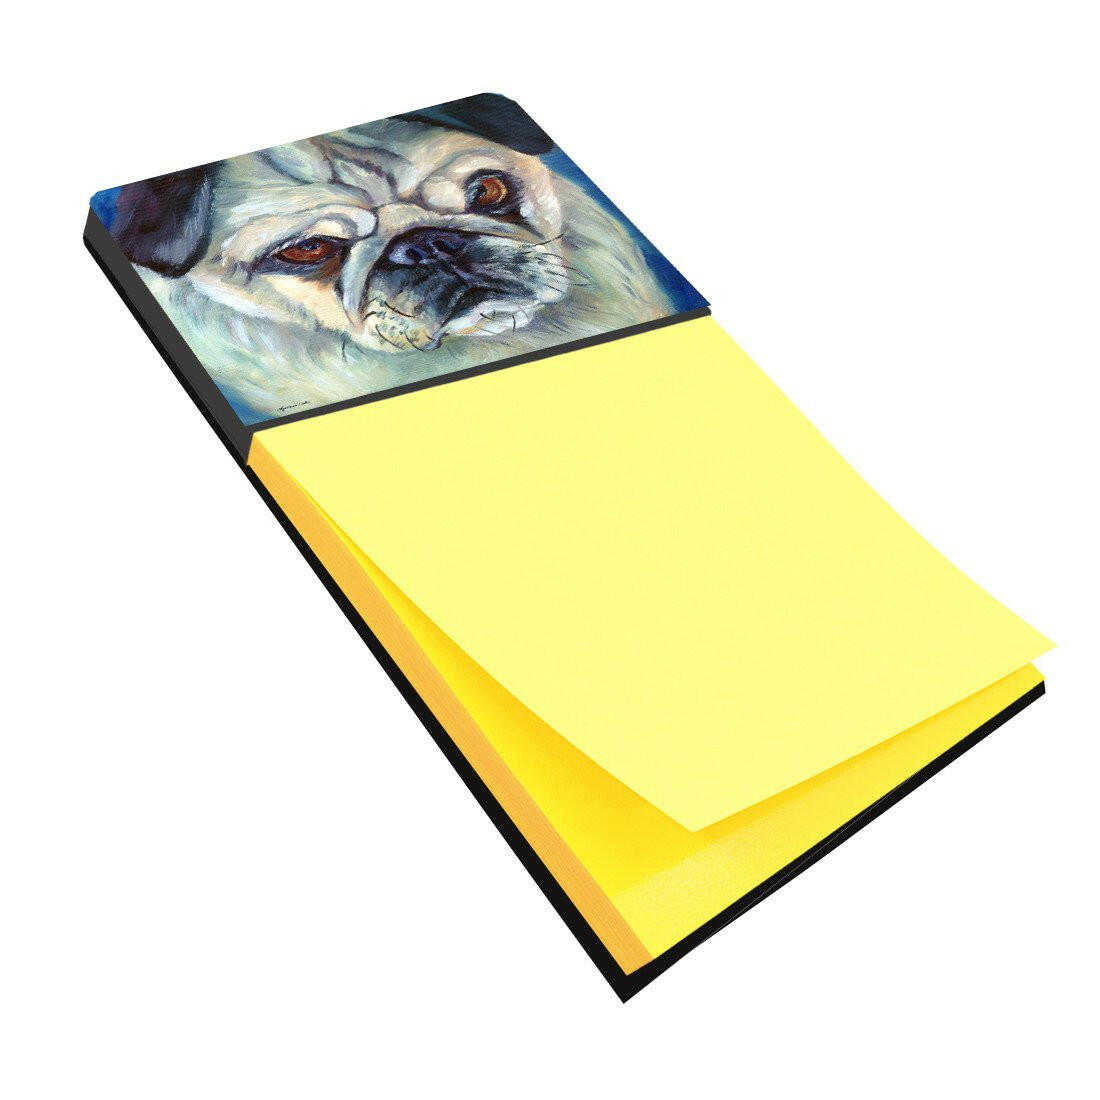 Pug in Thought Sticky Note Holder 7422SN by Caroline's Treasures